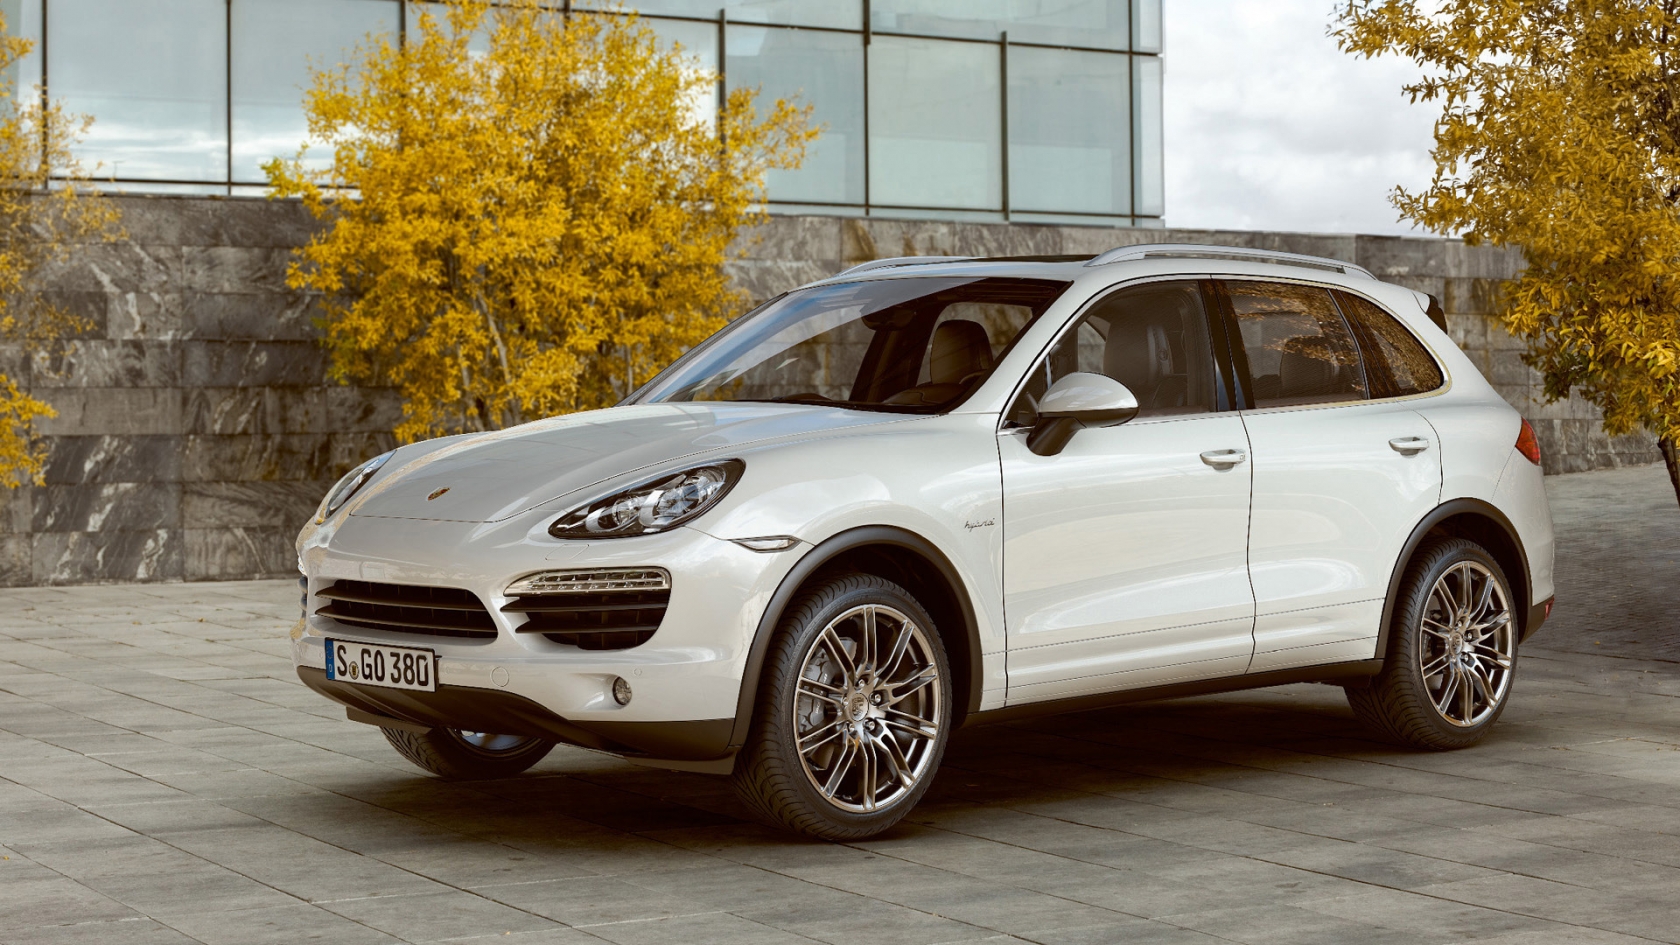 Porsche Cayenne S Hybrid 2011 Front And Side for 1680 x 945 HDTV resolution